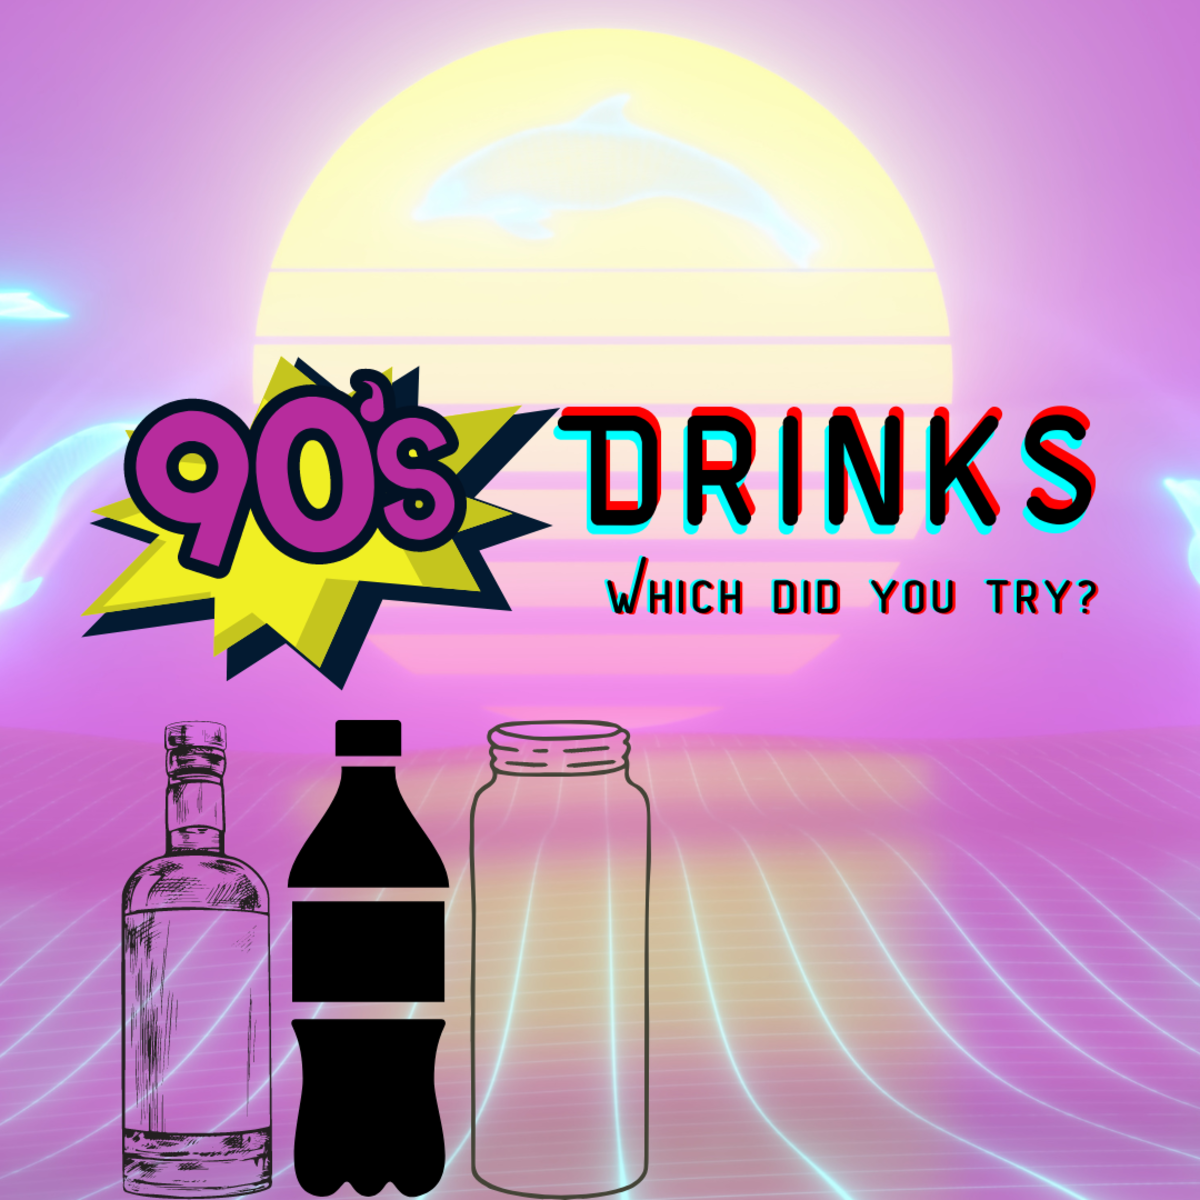 '90s drinks: Which ones did you try?